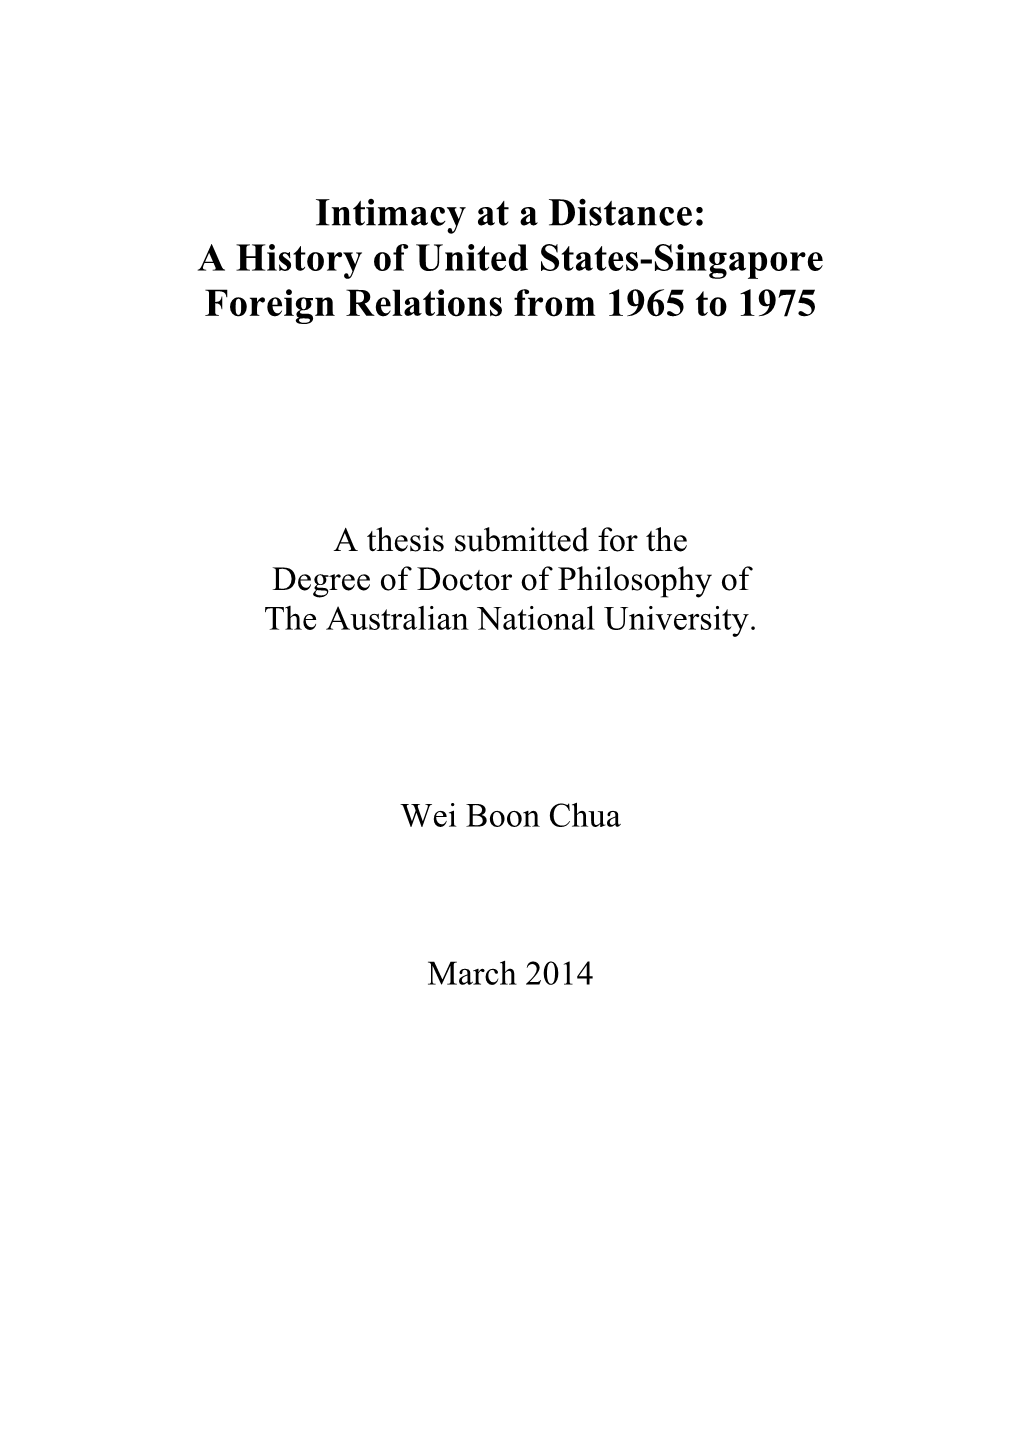 A History of United States-Singapore Foreign Relations from 1965 to 1975